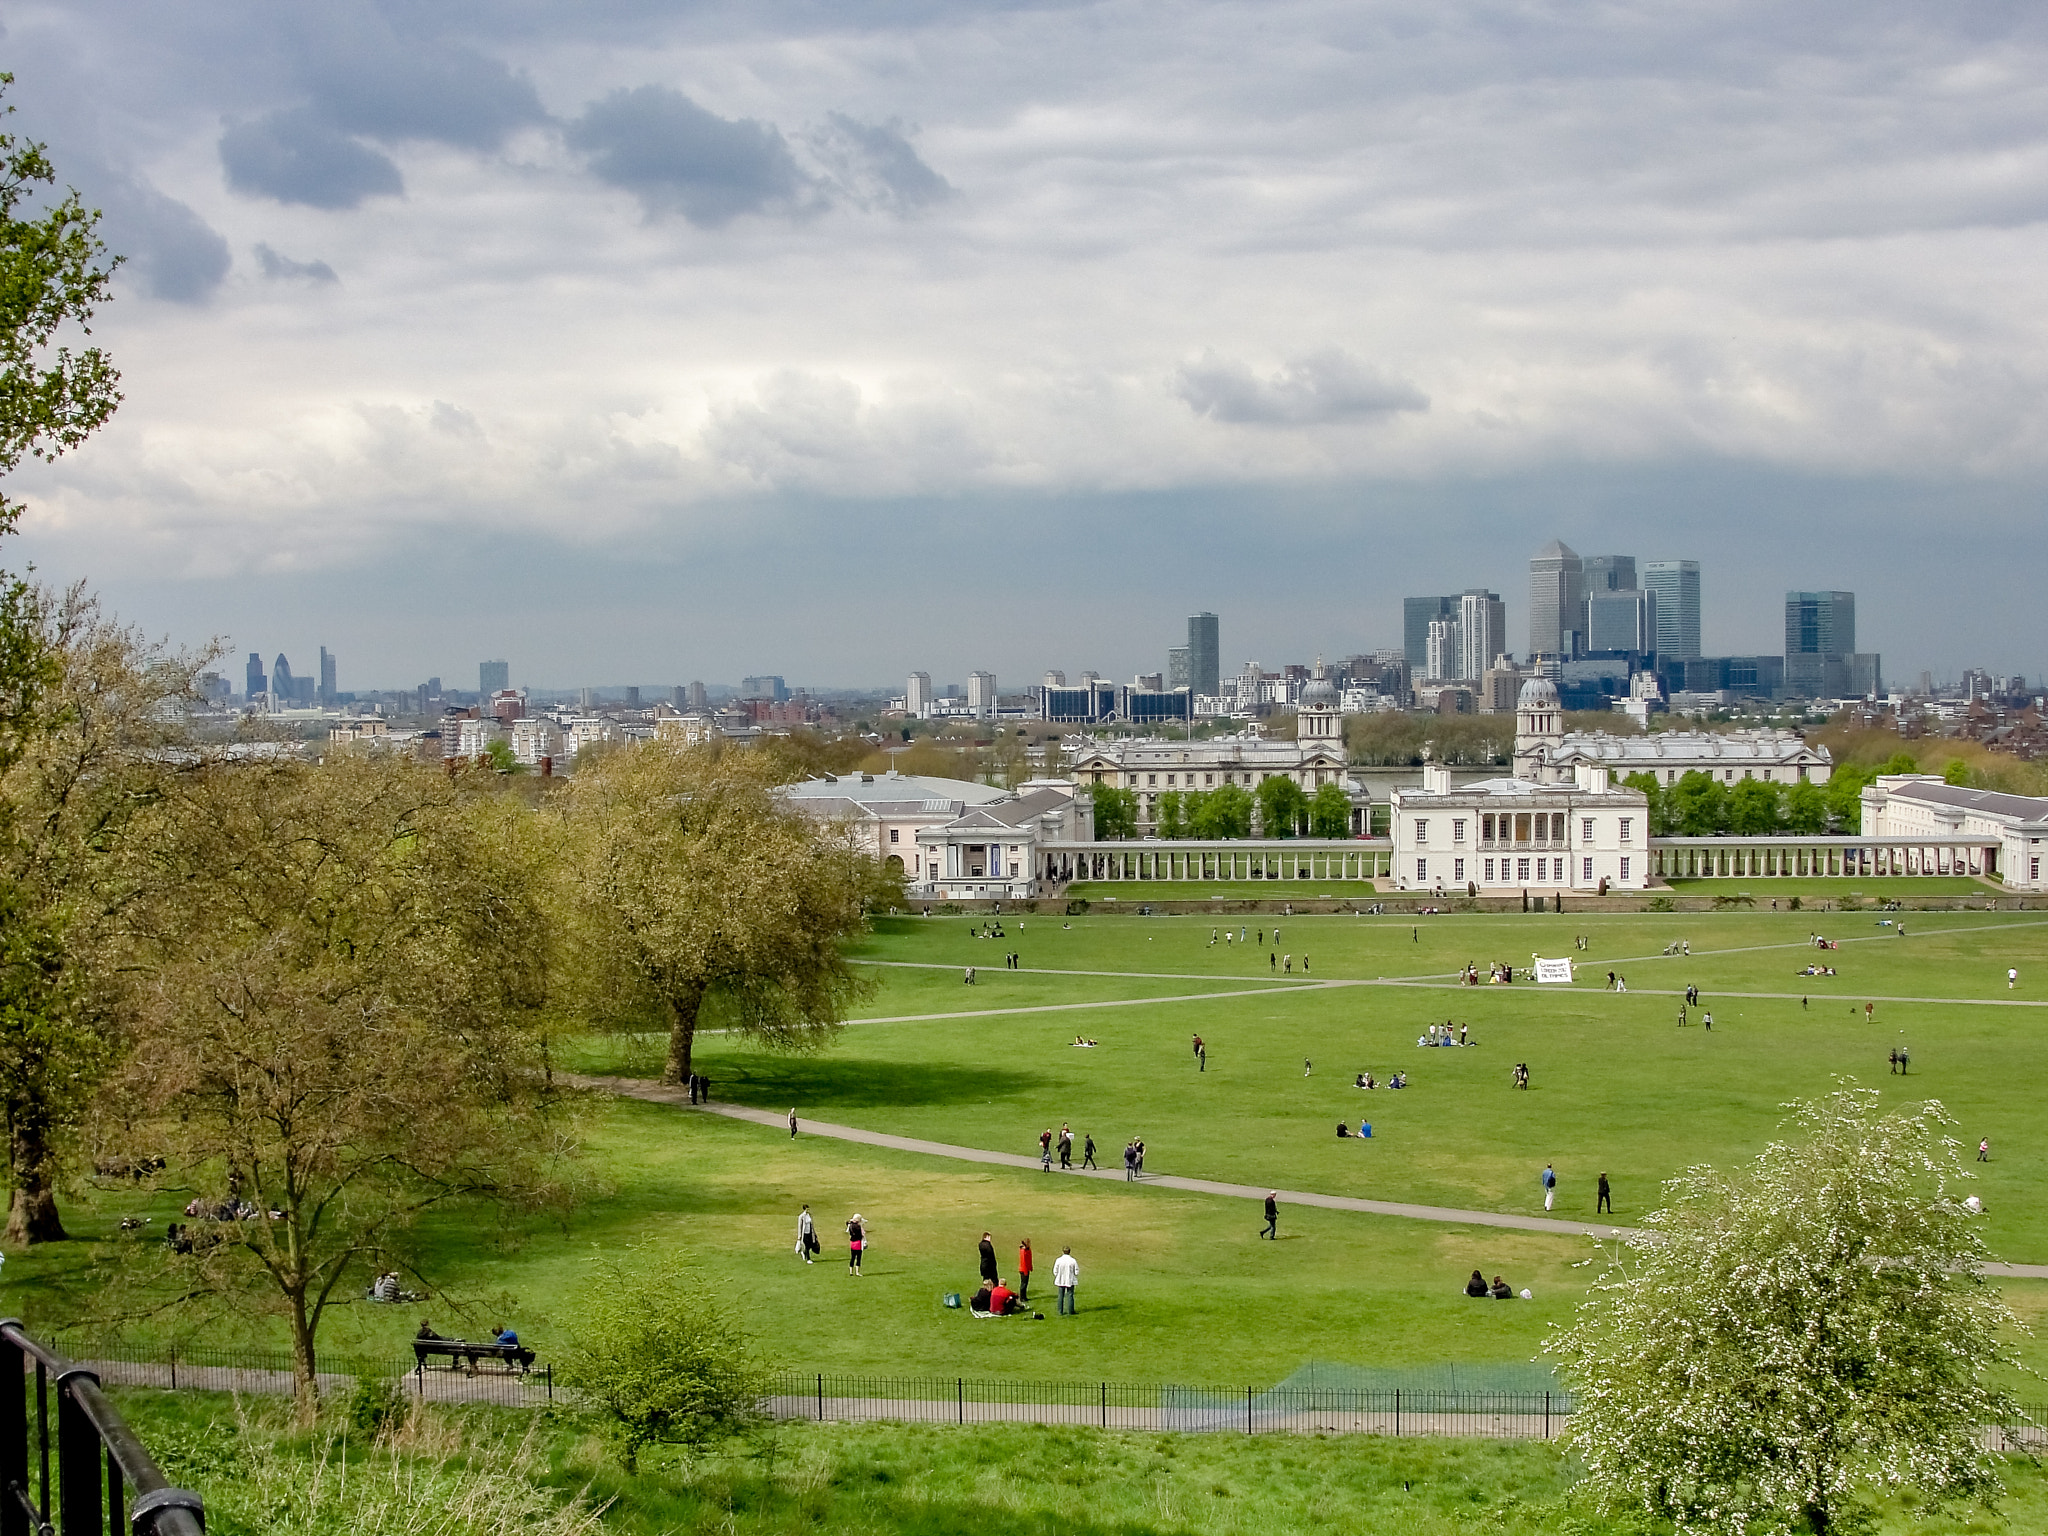 Sony Cyber-shot DSC-H20 sample photo. City of london from greenwich hill 2 photography